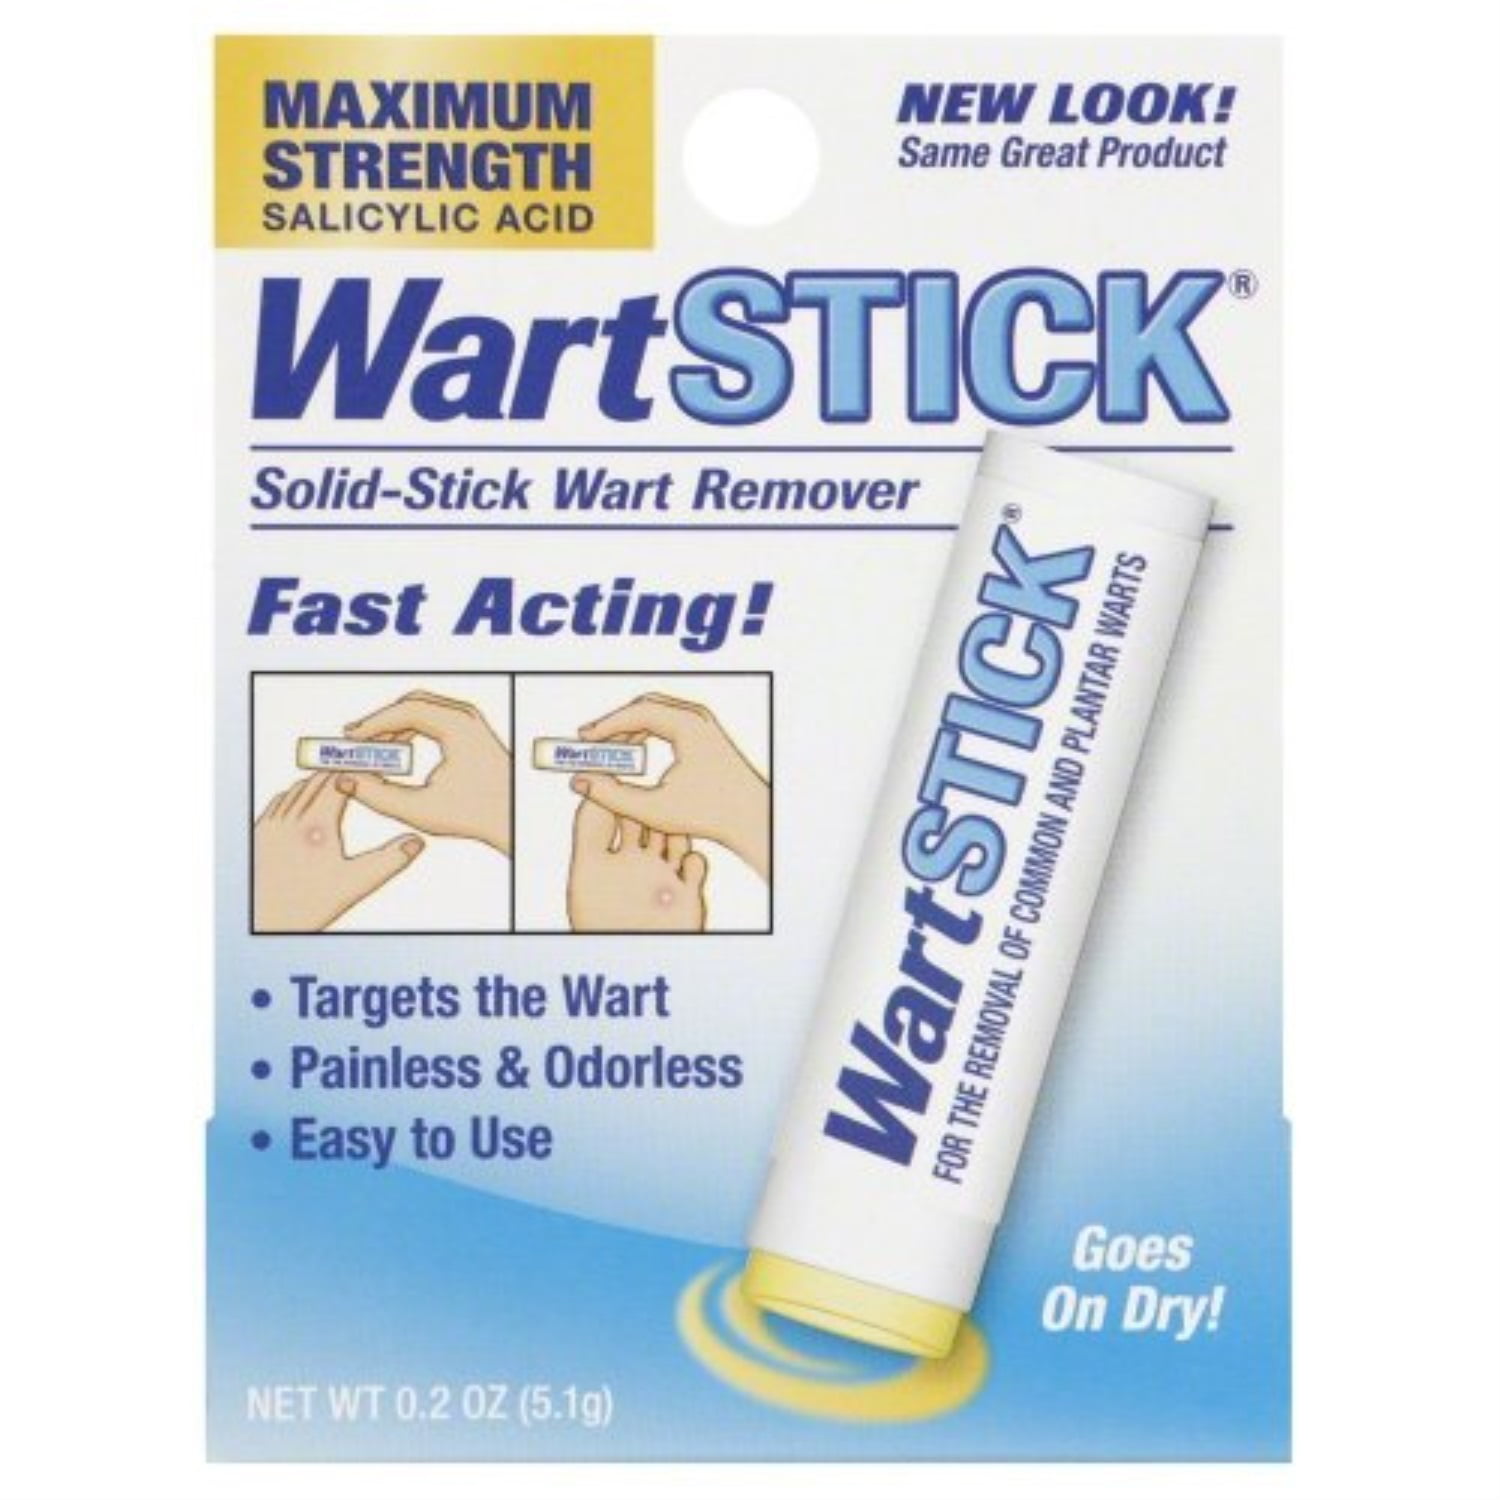 Wart Stick For The Removal Of Common And Plantar Warts 3 Count